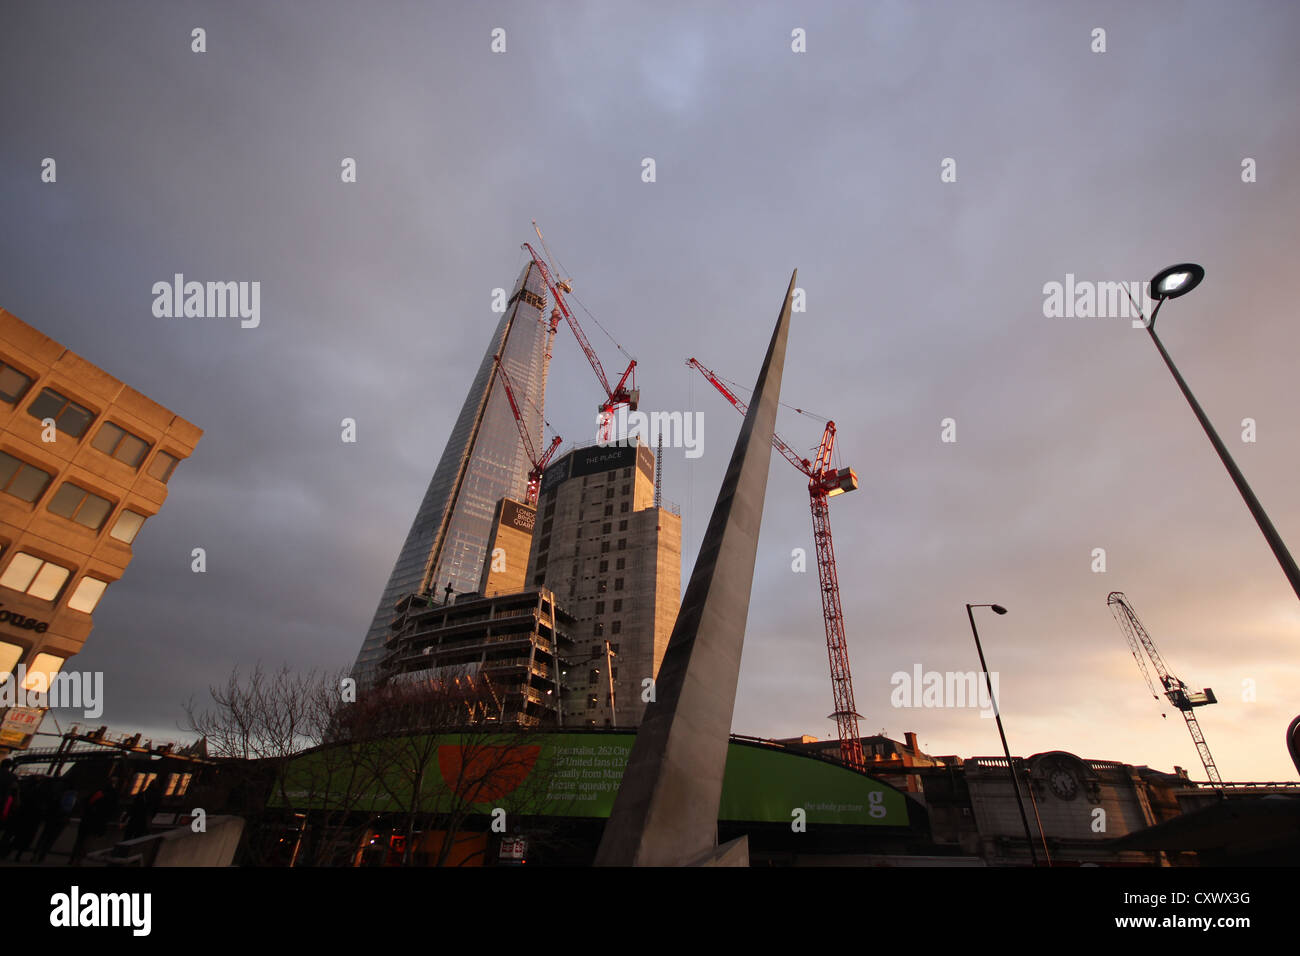 London, buildings and works in the city from a distance, cranes europe, architecture, buildings, windows, modern architecture Stock Photo